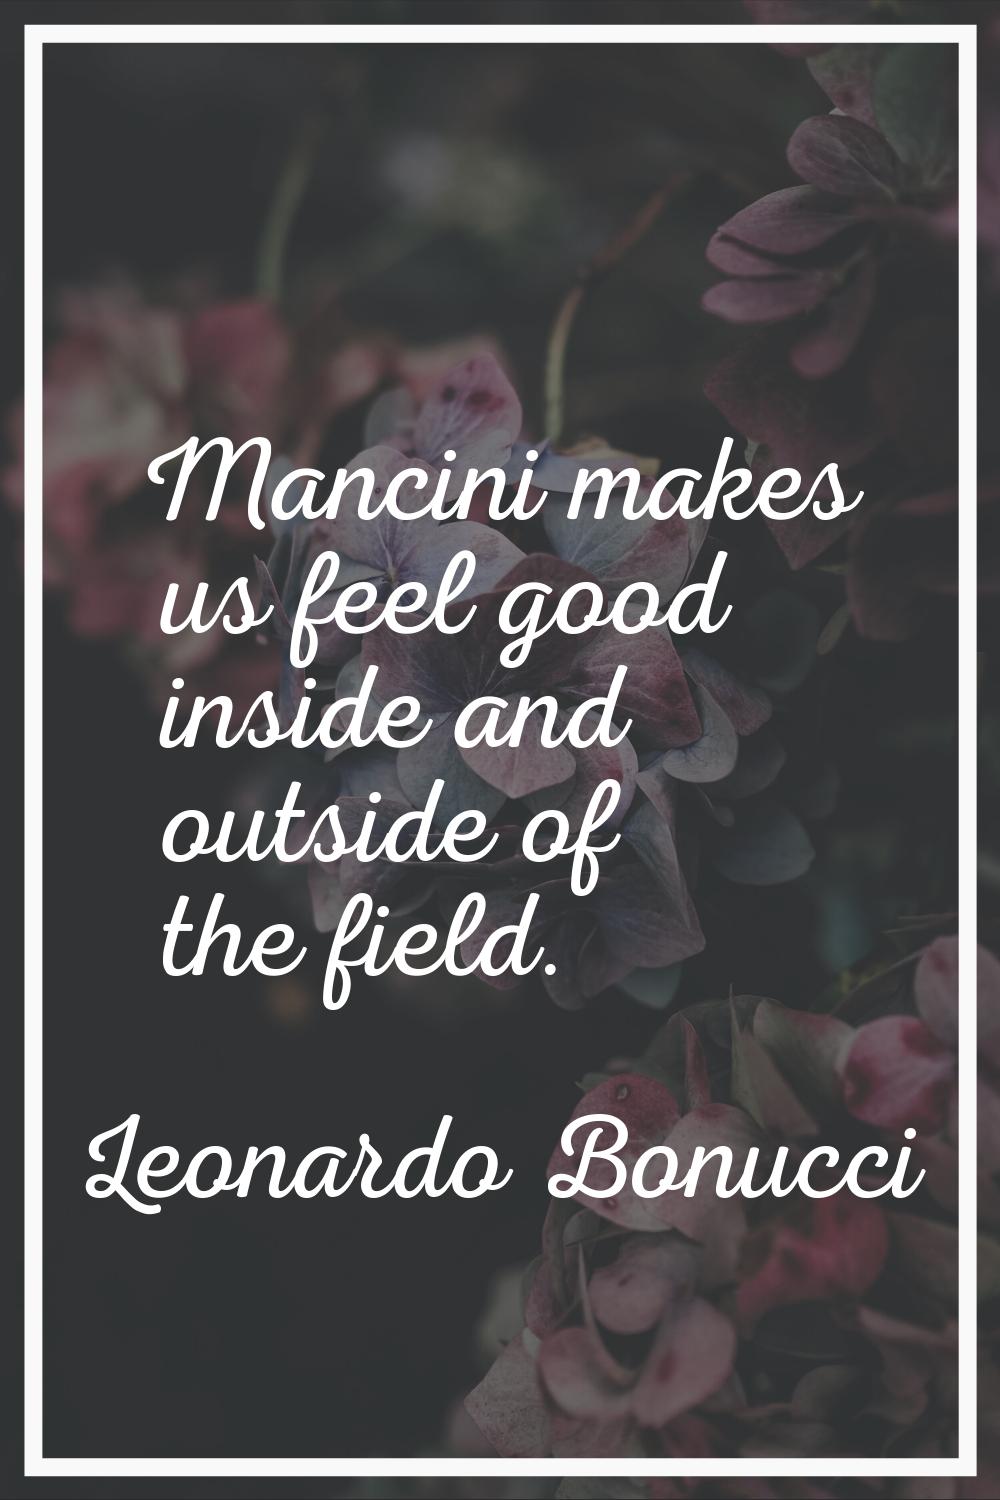 Mancini makes us feel good inside and outside of the field.